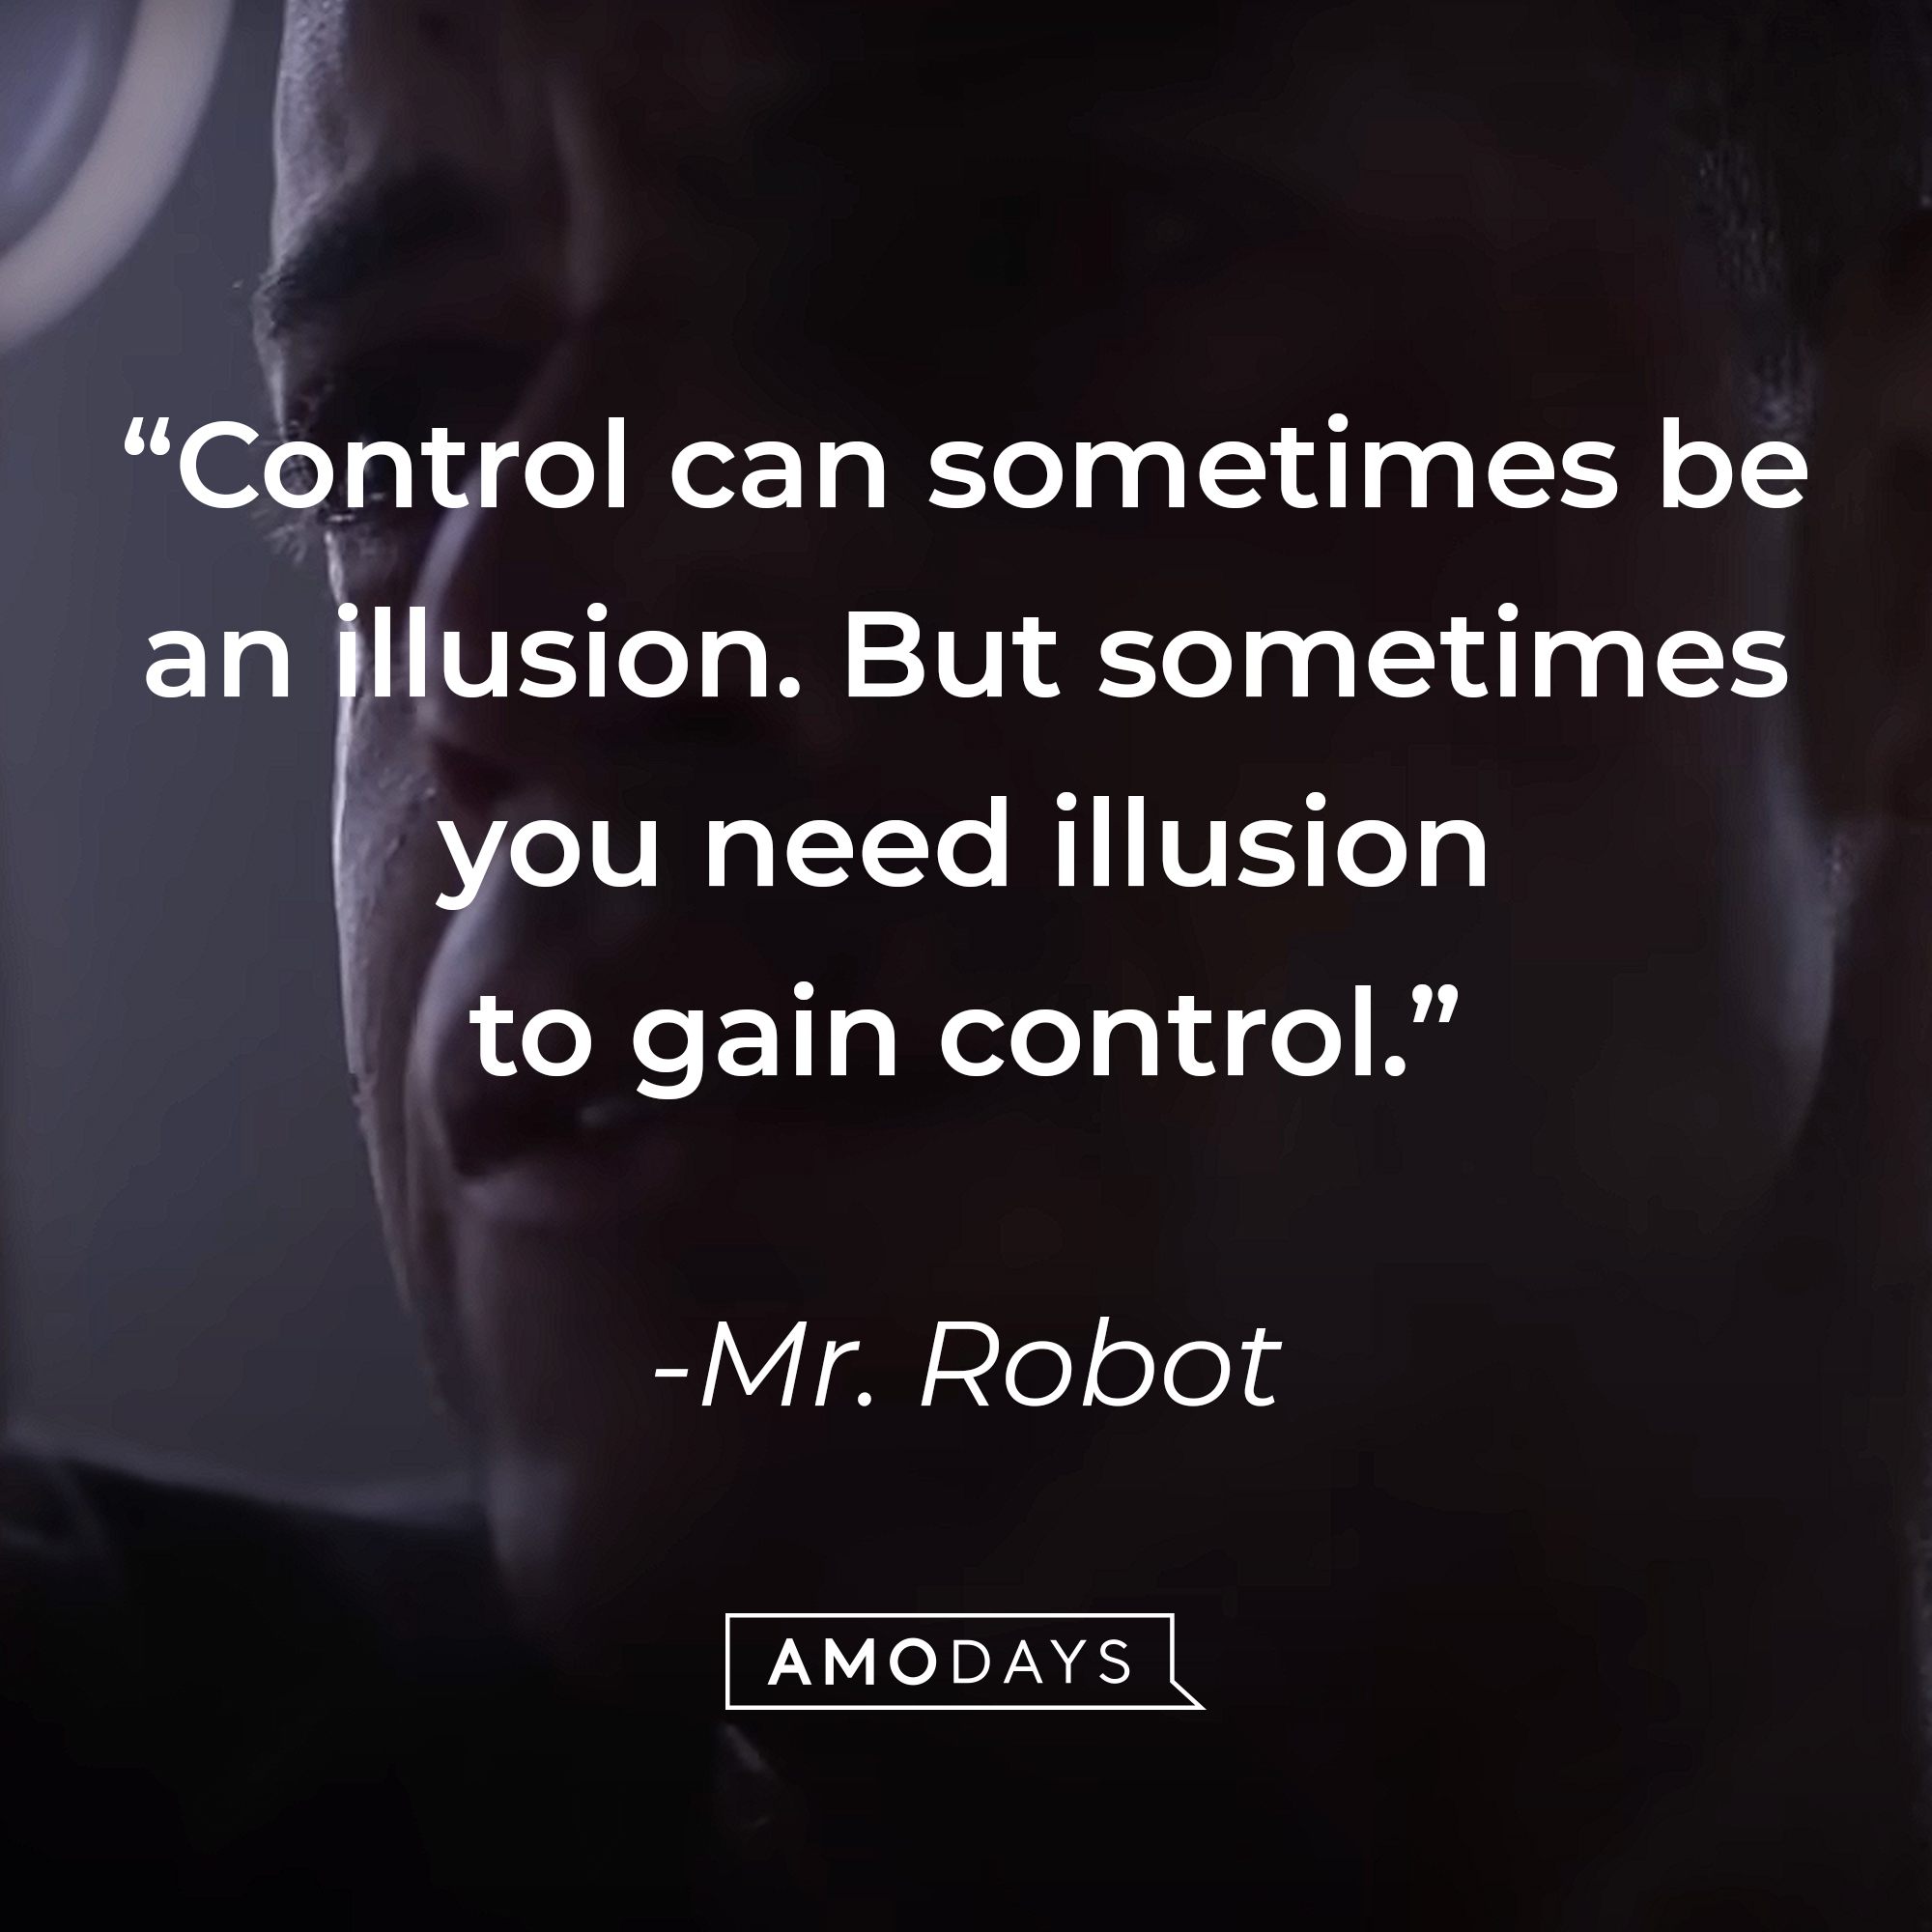 Mr. Robot's quote: "Control can sometimes be an illusion. But sometimes you need illusion to gain control." | Source: youtube.com/MrRobot